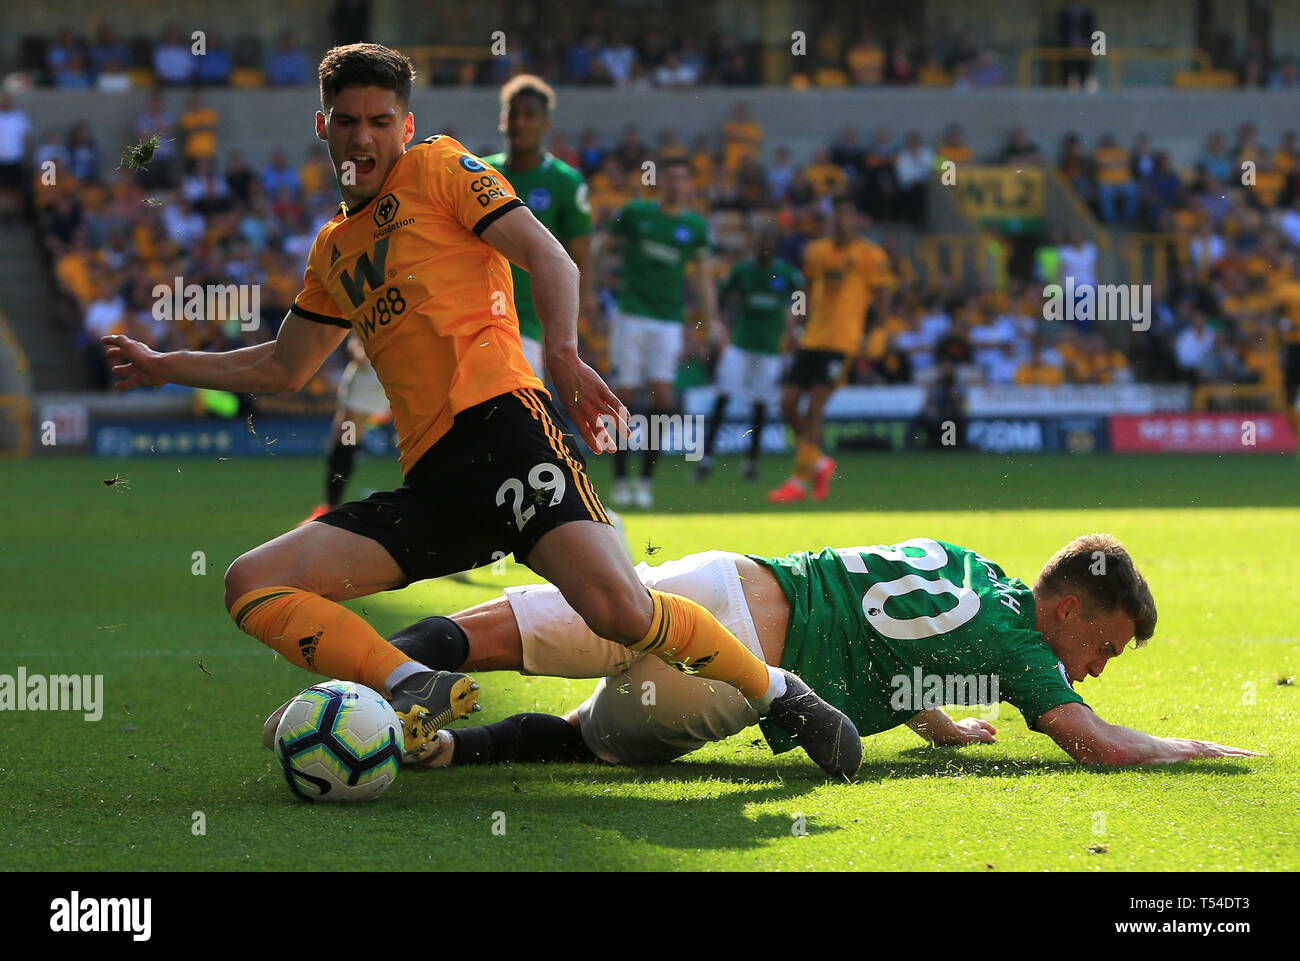 Wolverhampton, UK. 20th Apr, 2019. Ruben Vinagre of Wolverhampton Wanderers is fouled by Solly March of Brighton and Hove Albion Credit: Paul Roberts/OneUpTop/Alamy Live News Stock Photo